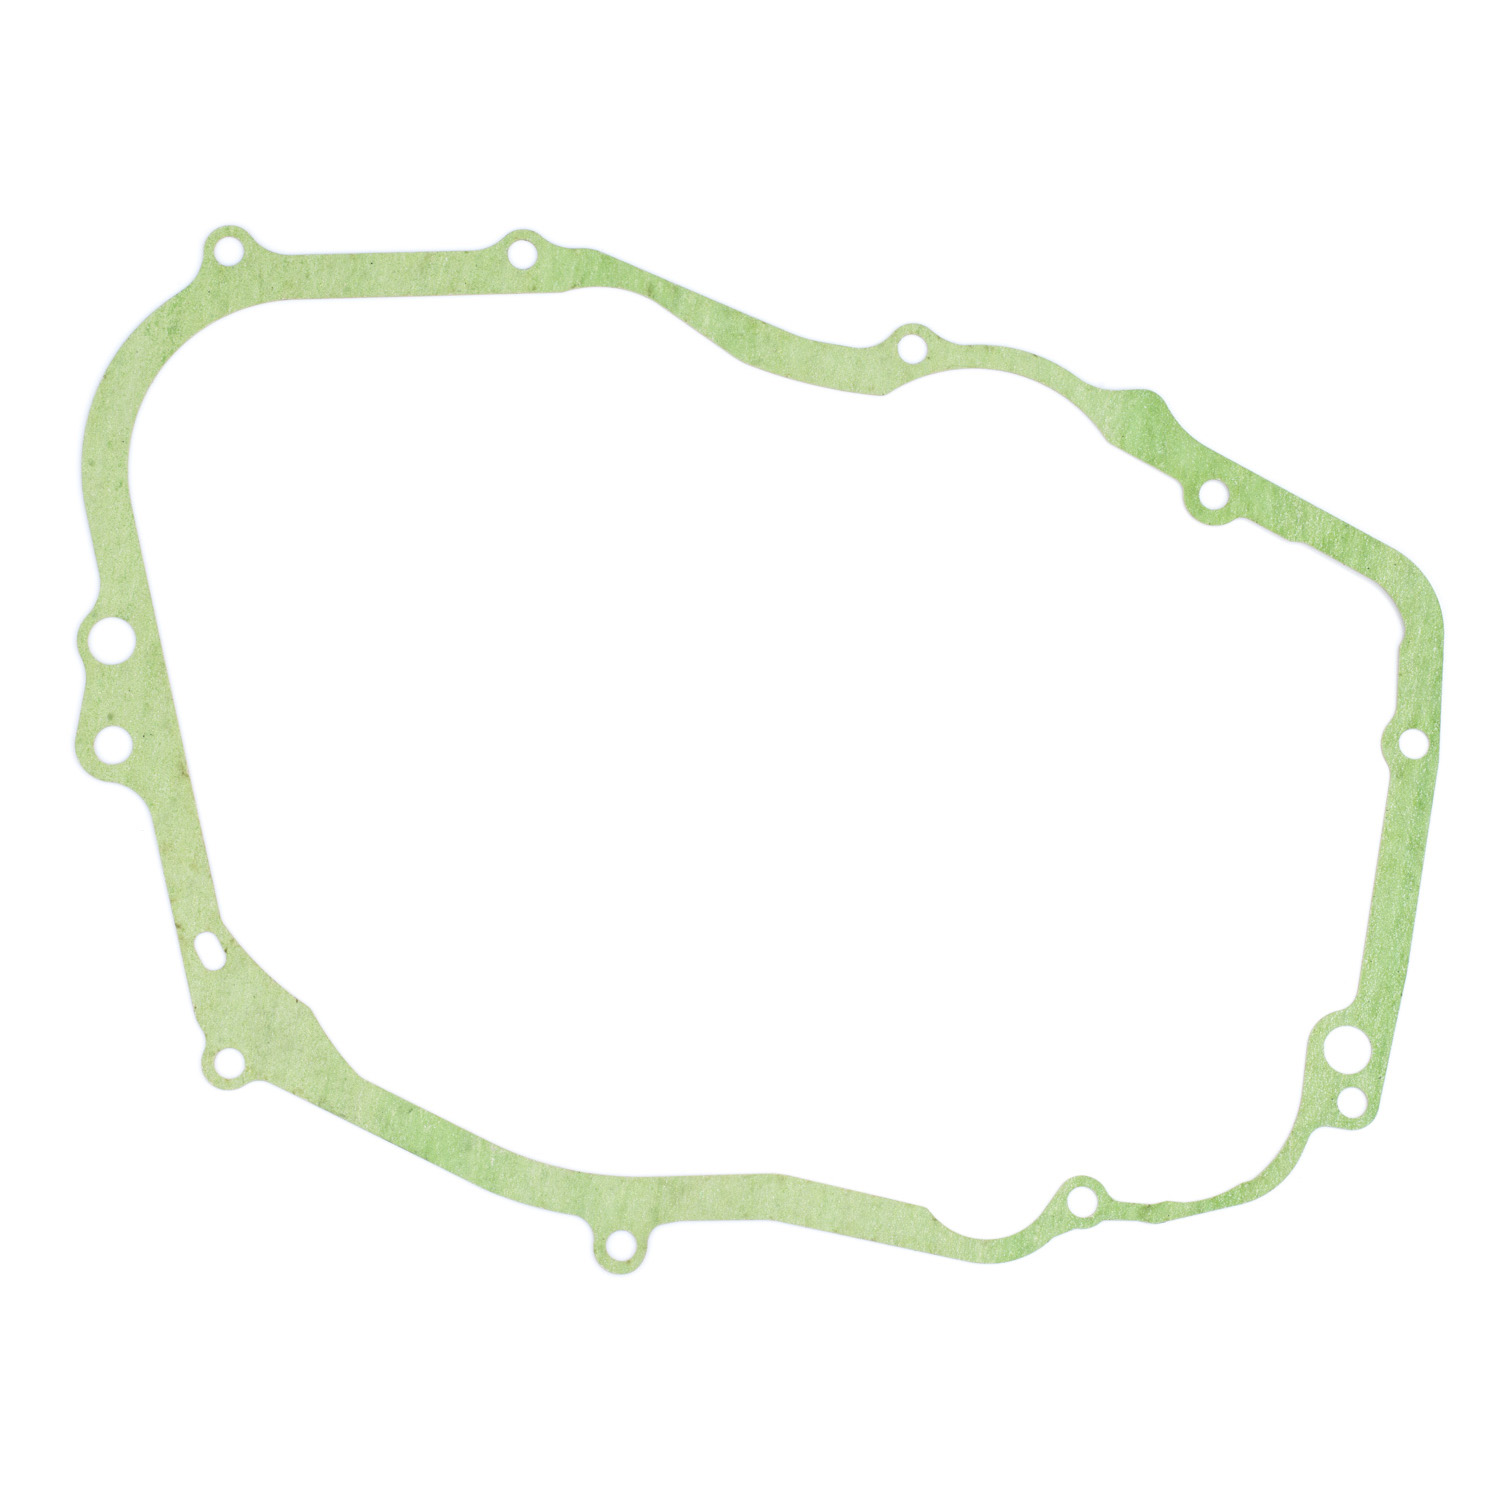 TZR250 3MA Clutch Cover Gasket